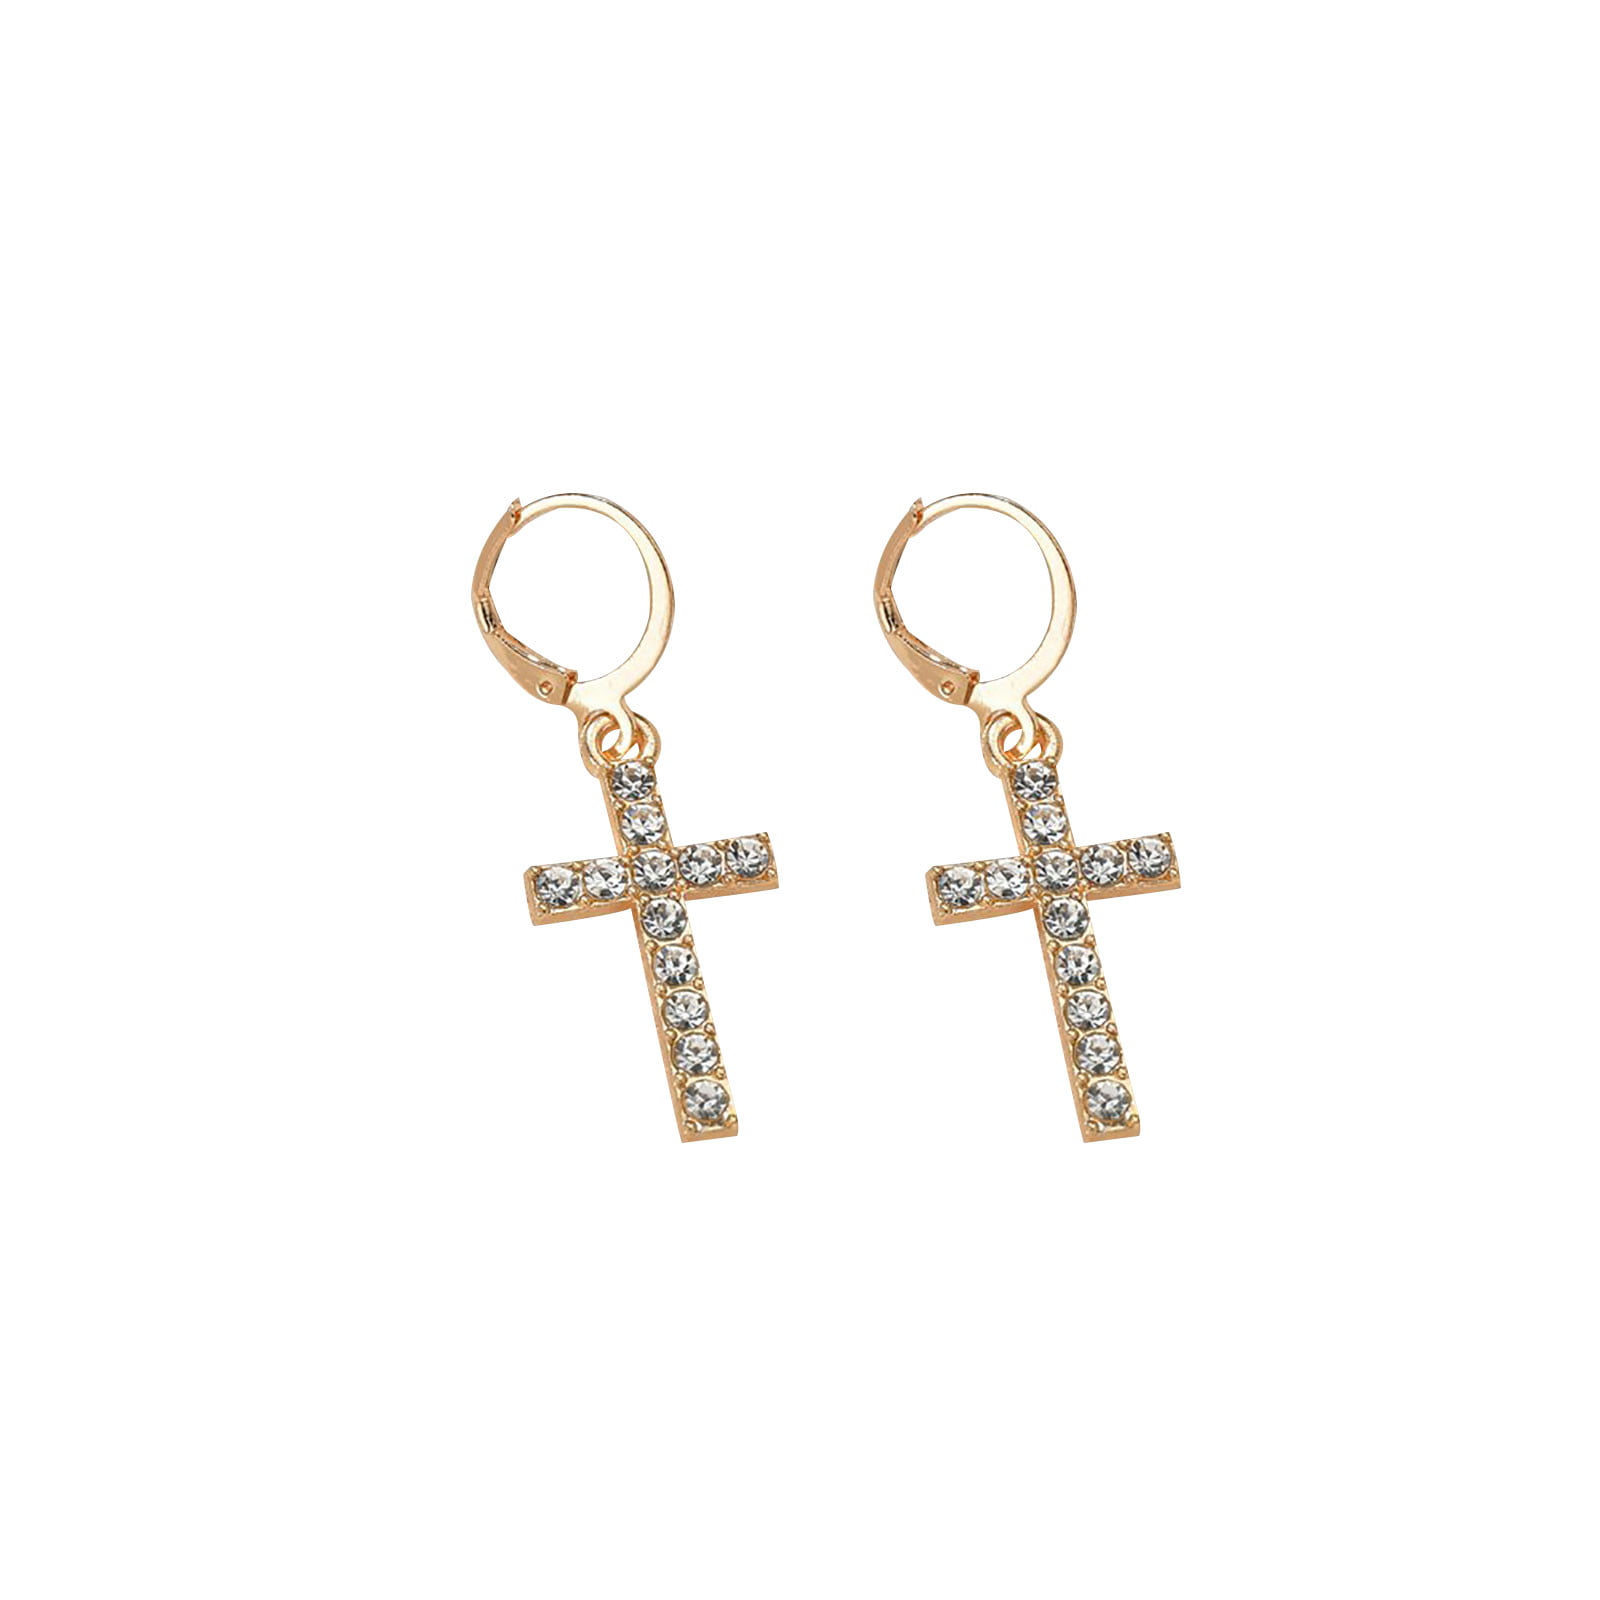 Details about   18k Gold Plated Clear CZ Religious Cross Earrings with Screw on Backs Girls Kids 